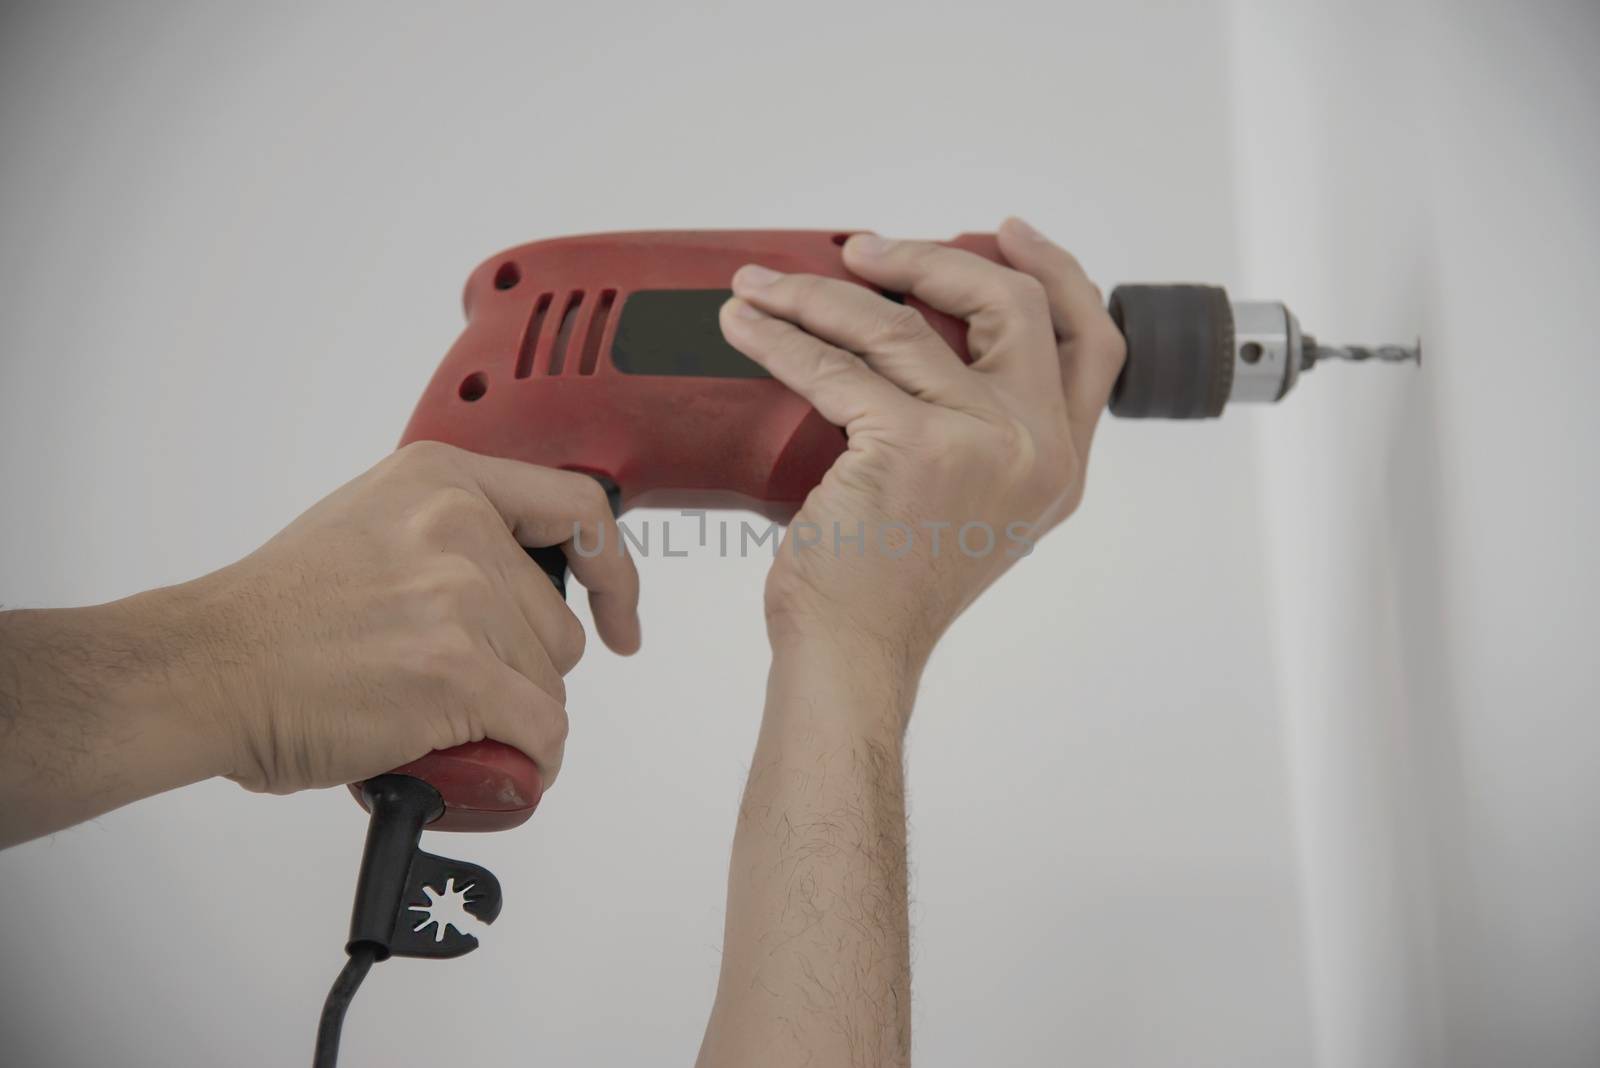 Man using hand drill device for installing home furniture at new white wall - people DIY home furniture installation concept